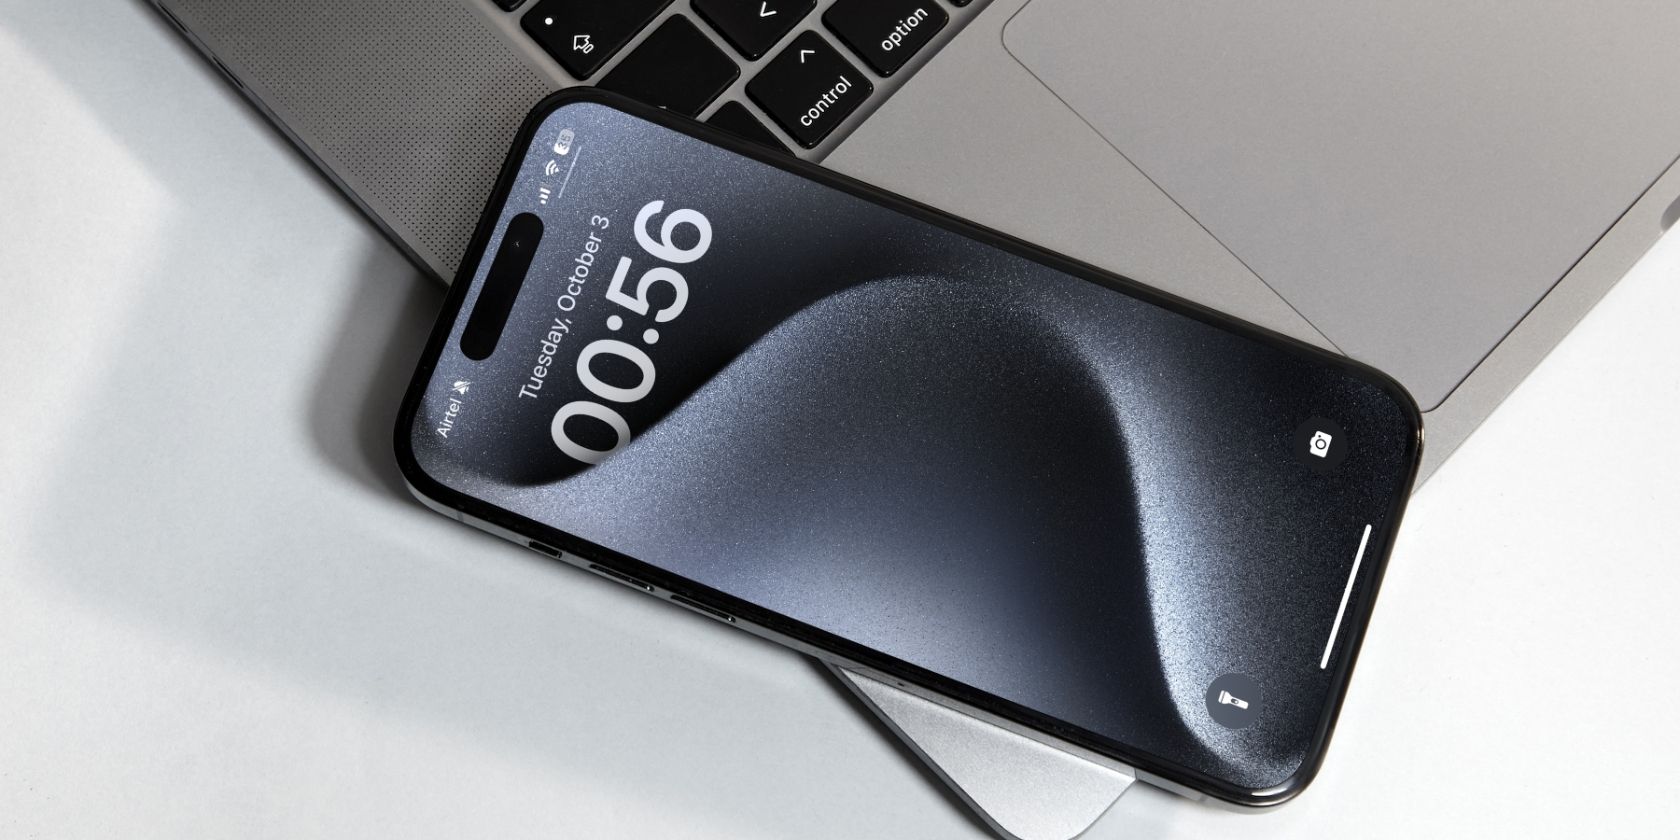 An iPhone showcasing it's lock screen while kept on a laptop